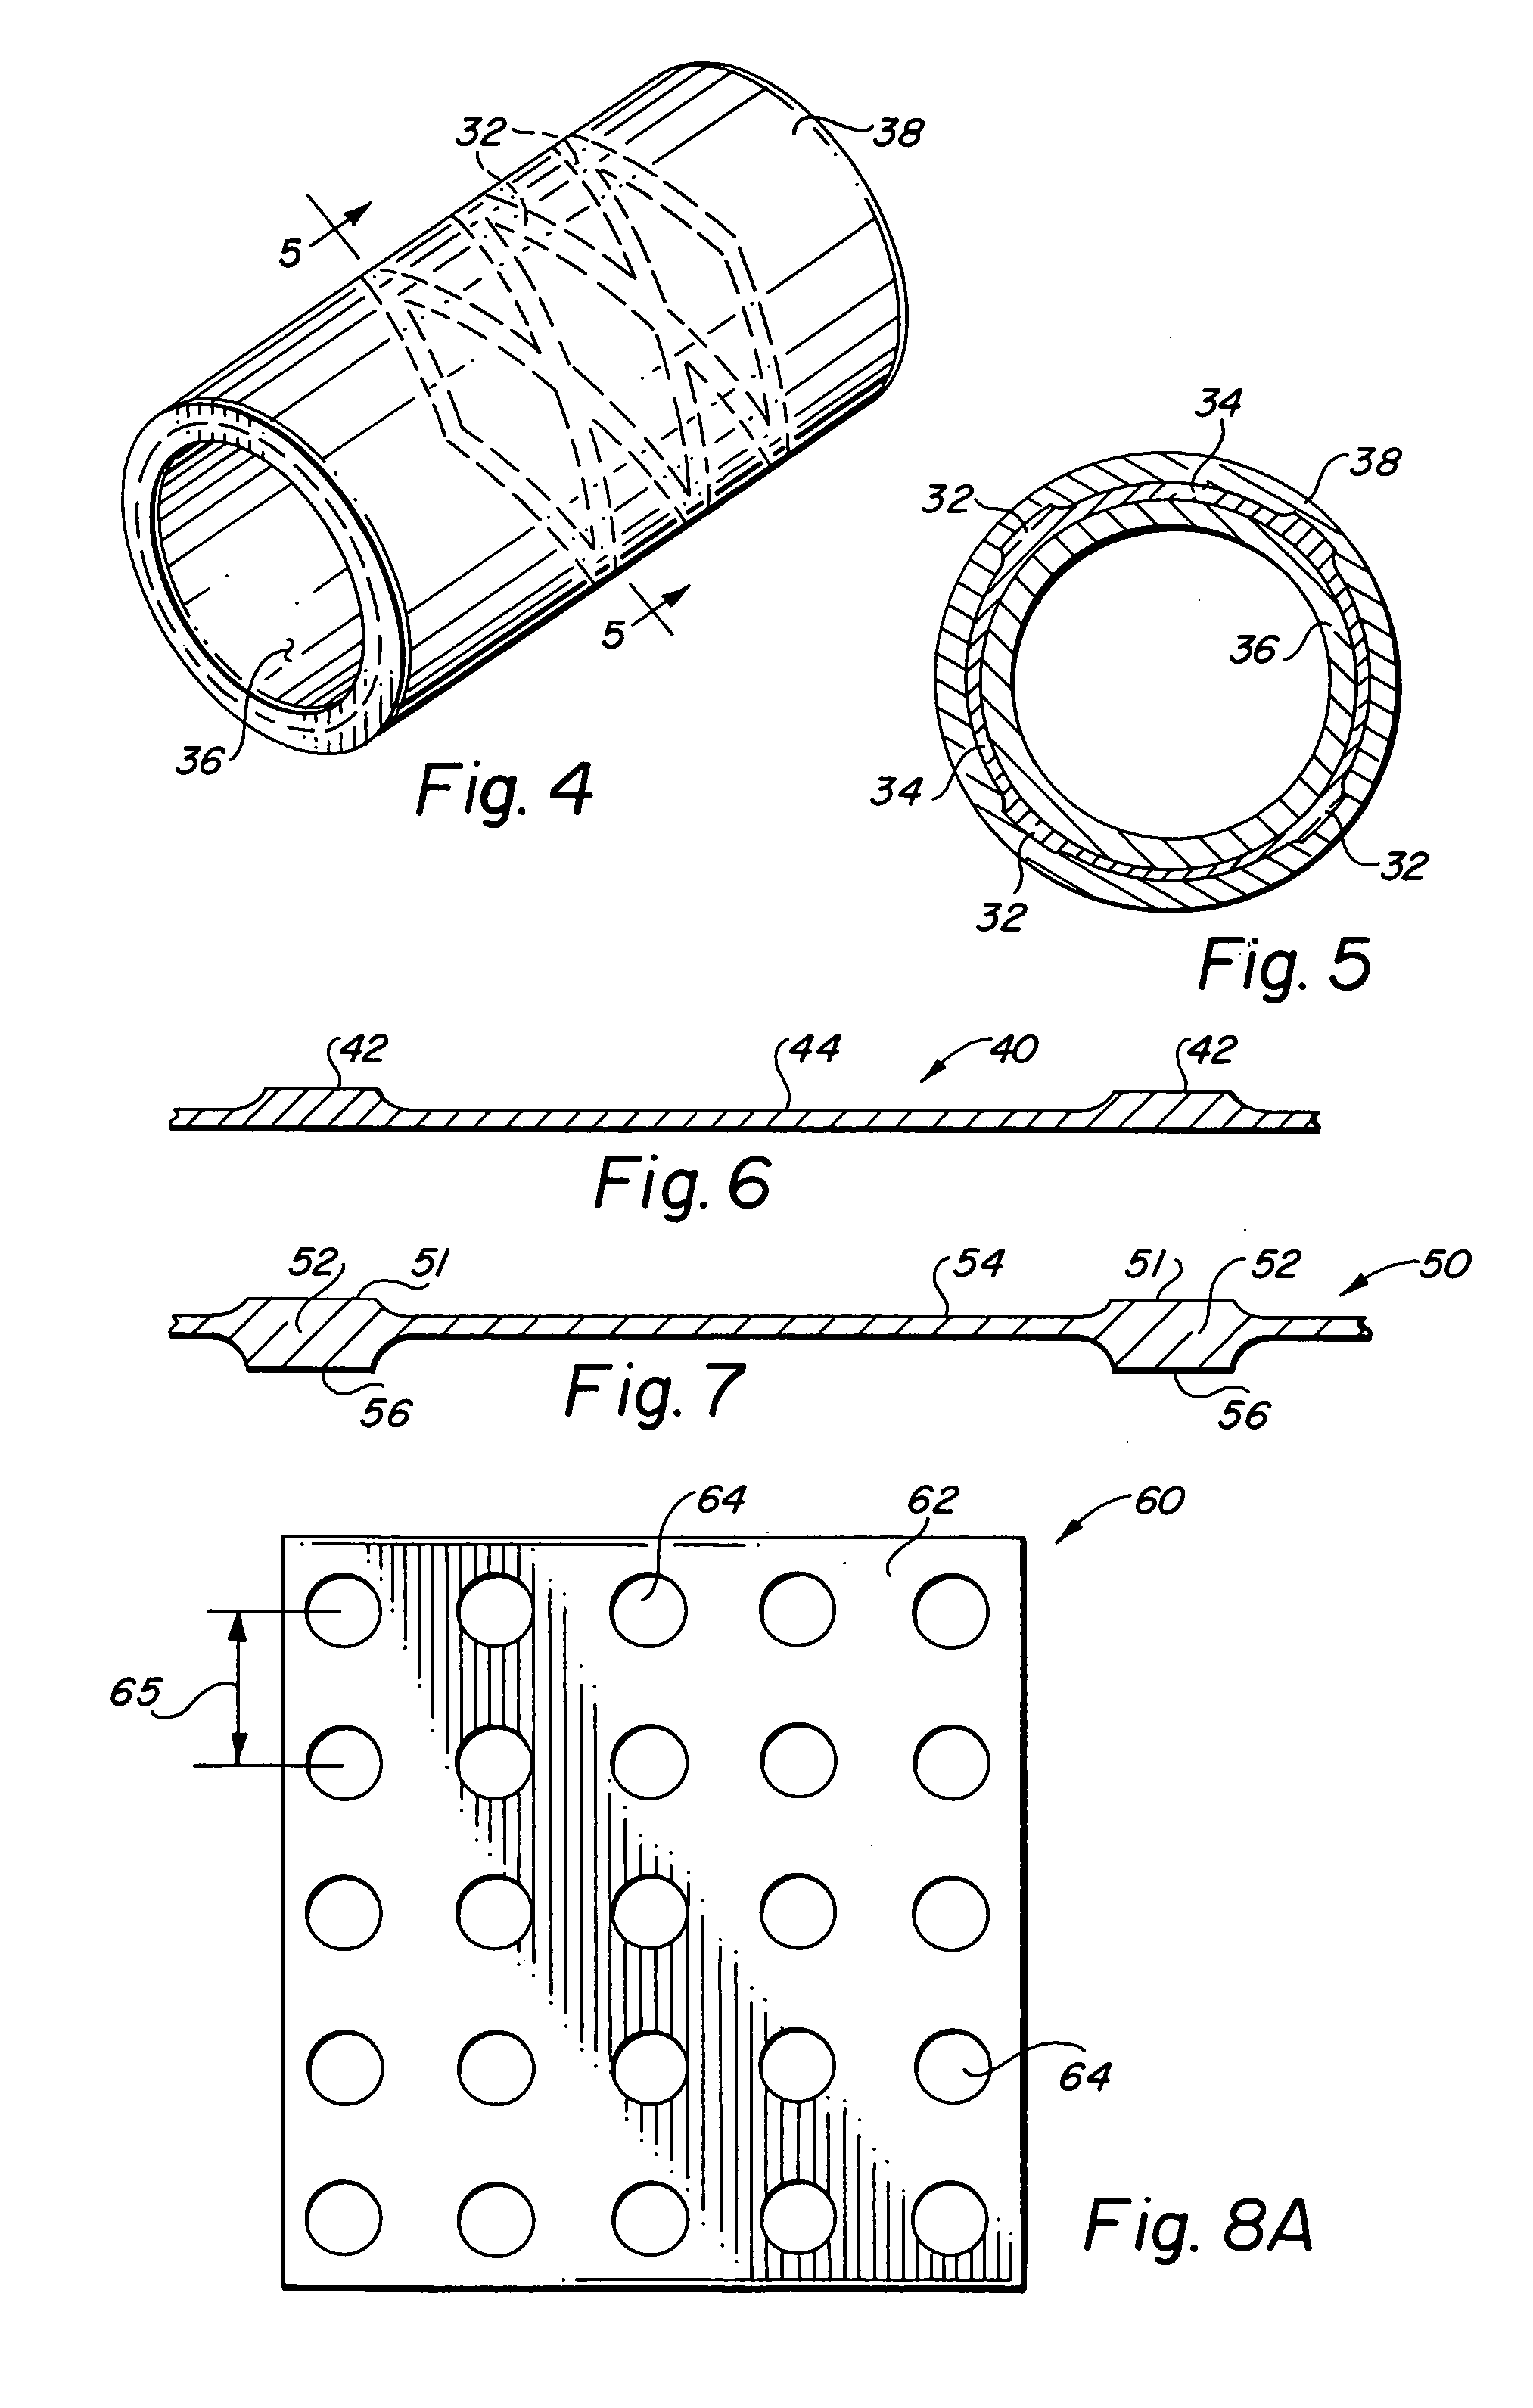 Self-supporting laminated films, structural materials and medical devices manufactured therefrom and methods of making same